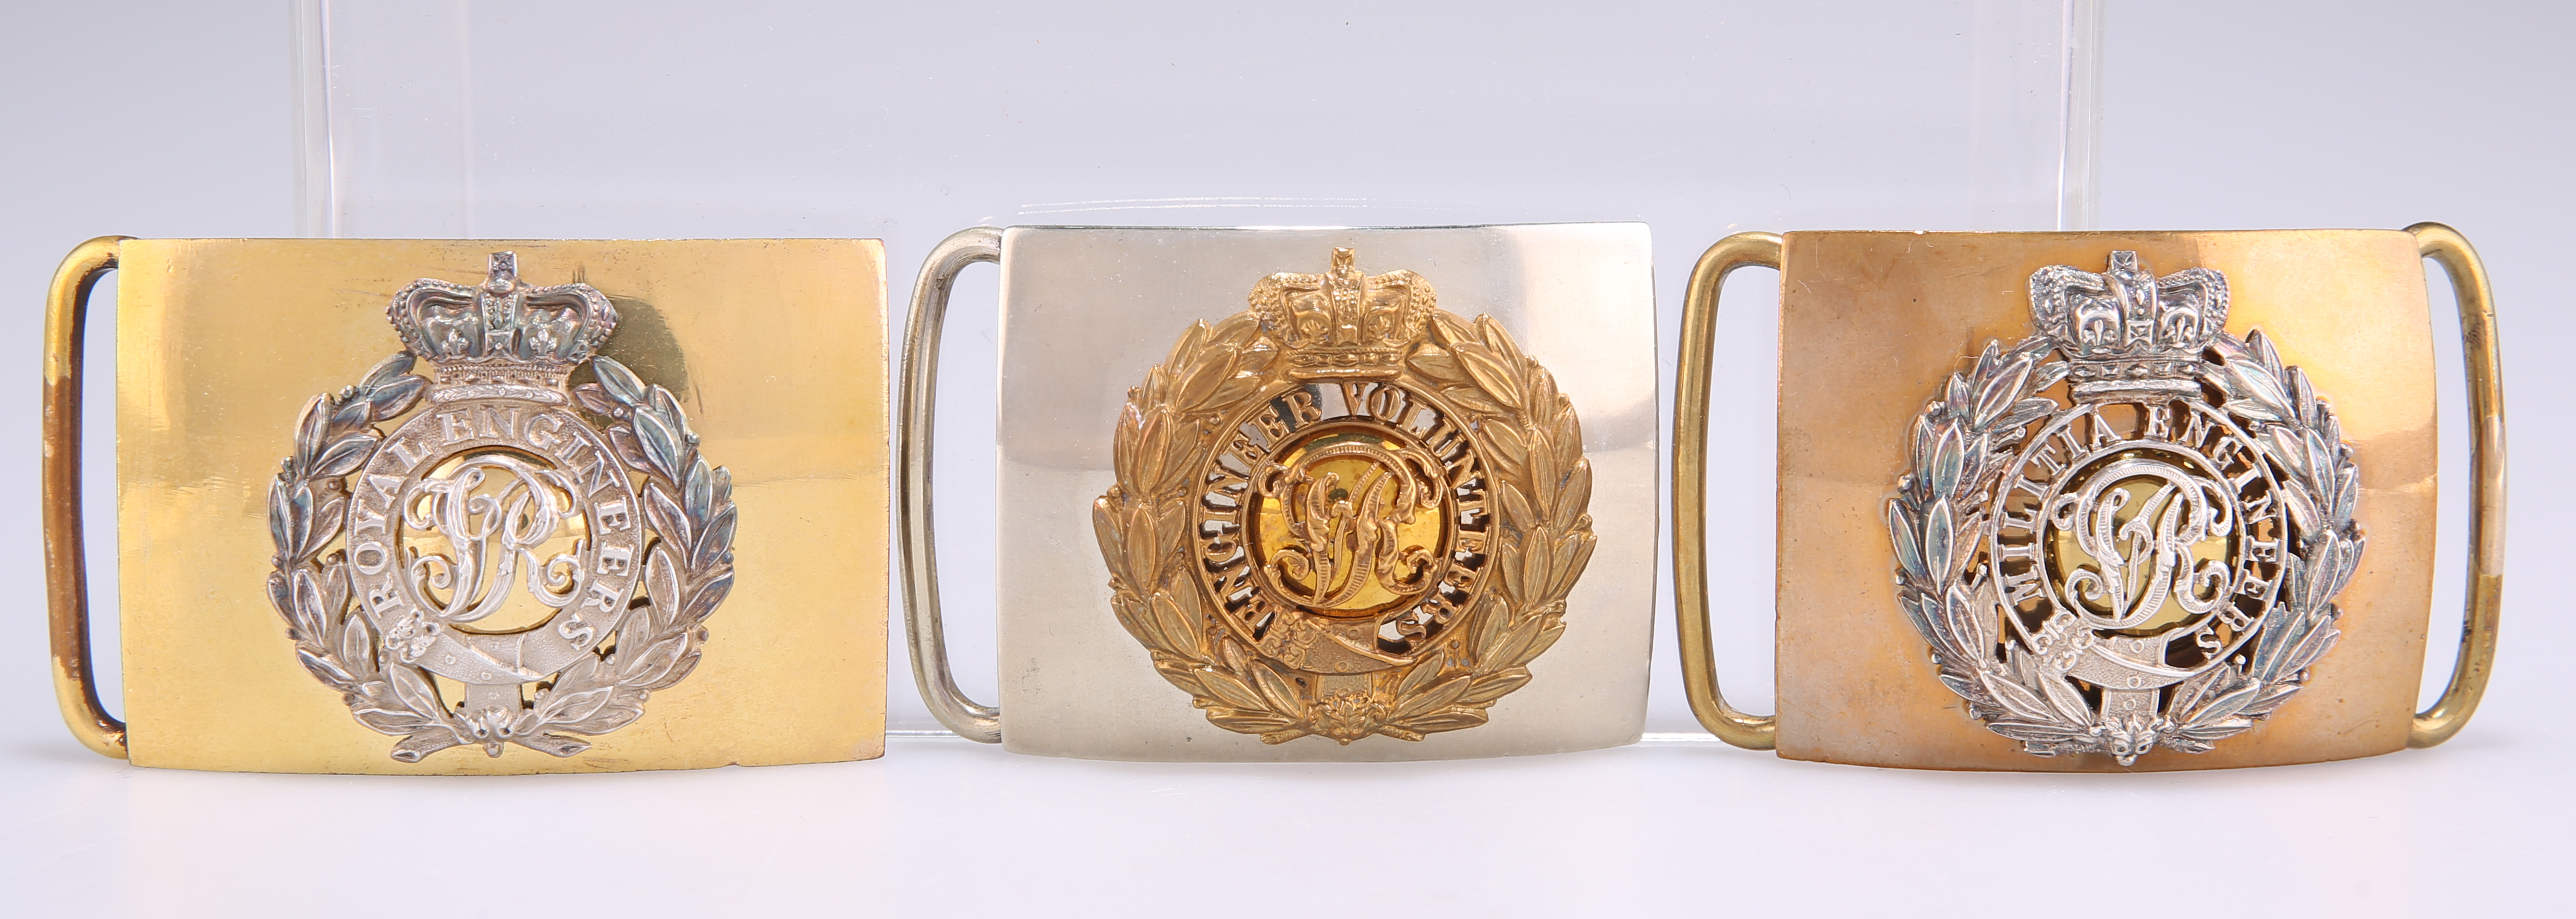 FOUR OFFICERS' PATTERN SILVER AND GILT WAIST BELT CLASPS OF THE ROYAL ENGINEERS - Image 2 of 2